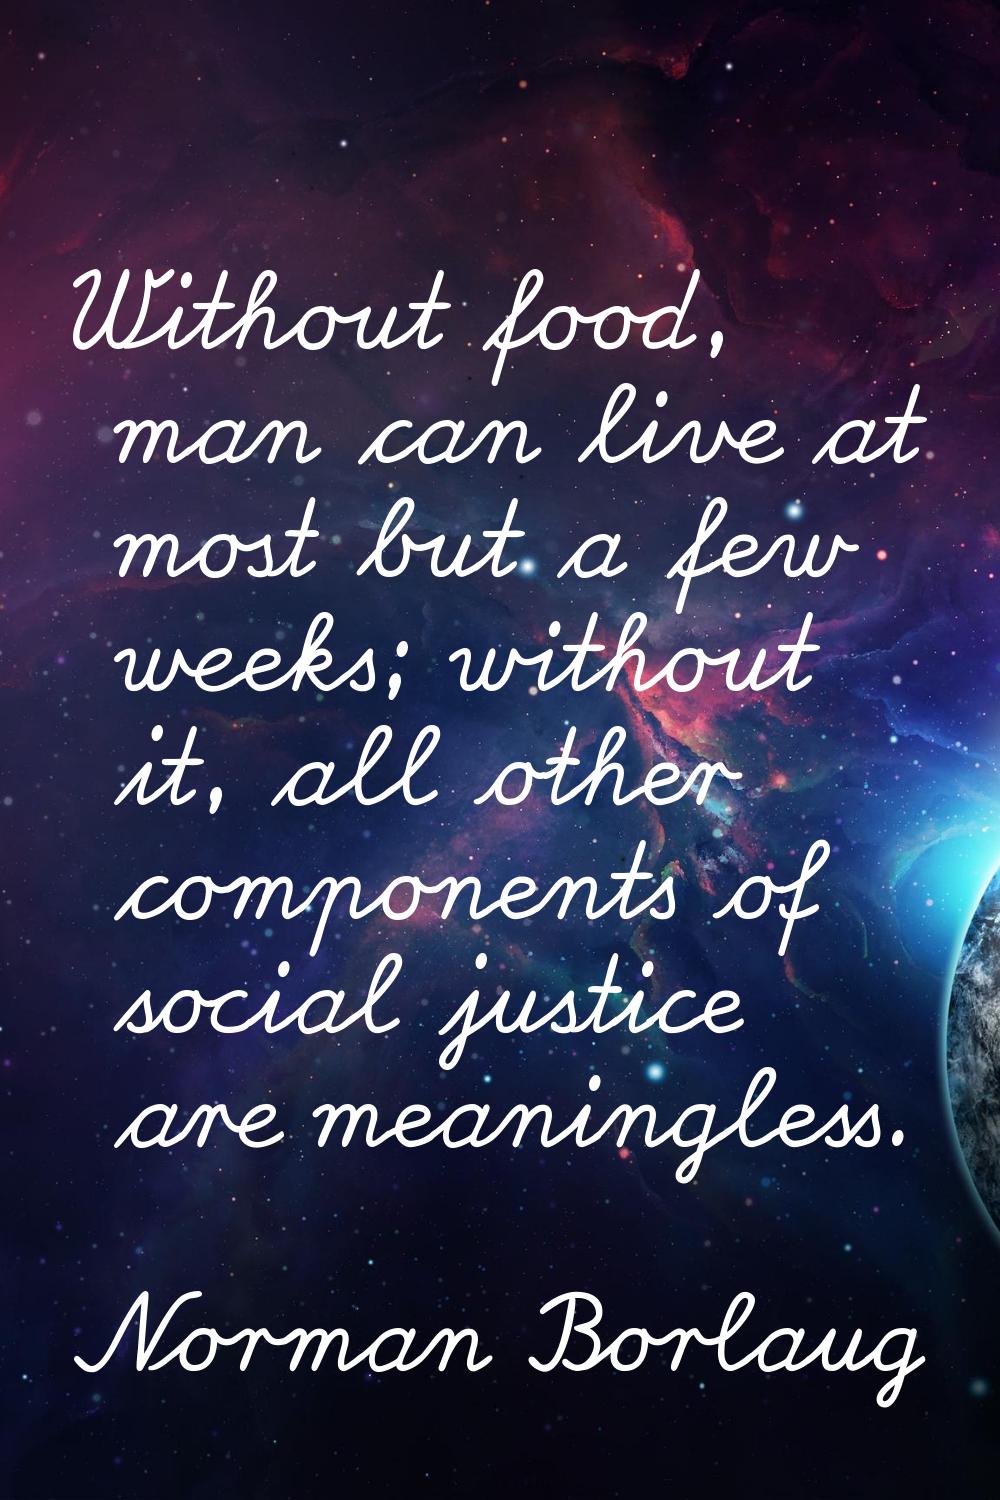 Without food, man can live at most but a few weeks; without it, all other components of social just